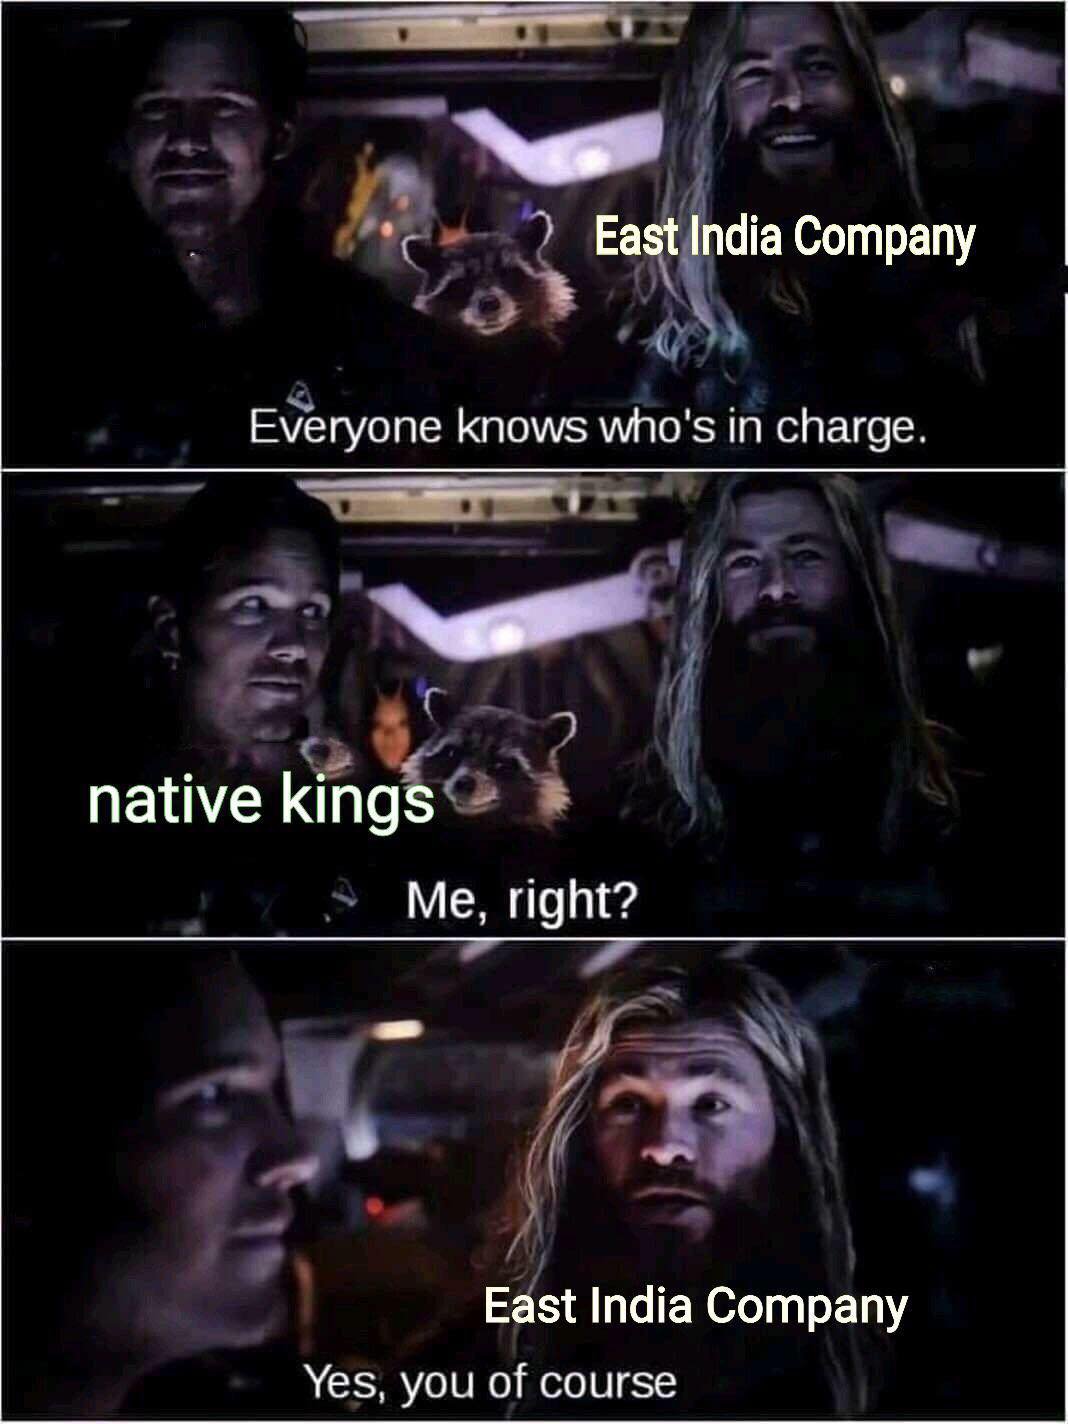 everyone knows whos in charge meme - 2 East India Company Everyone knows who's in charge. native kings Me, right? East India Company Yes, you of course